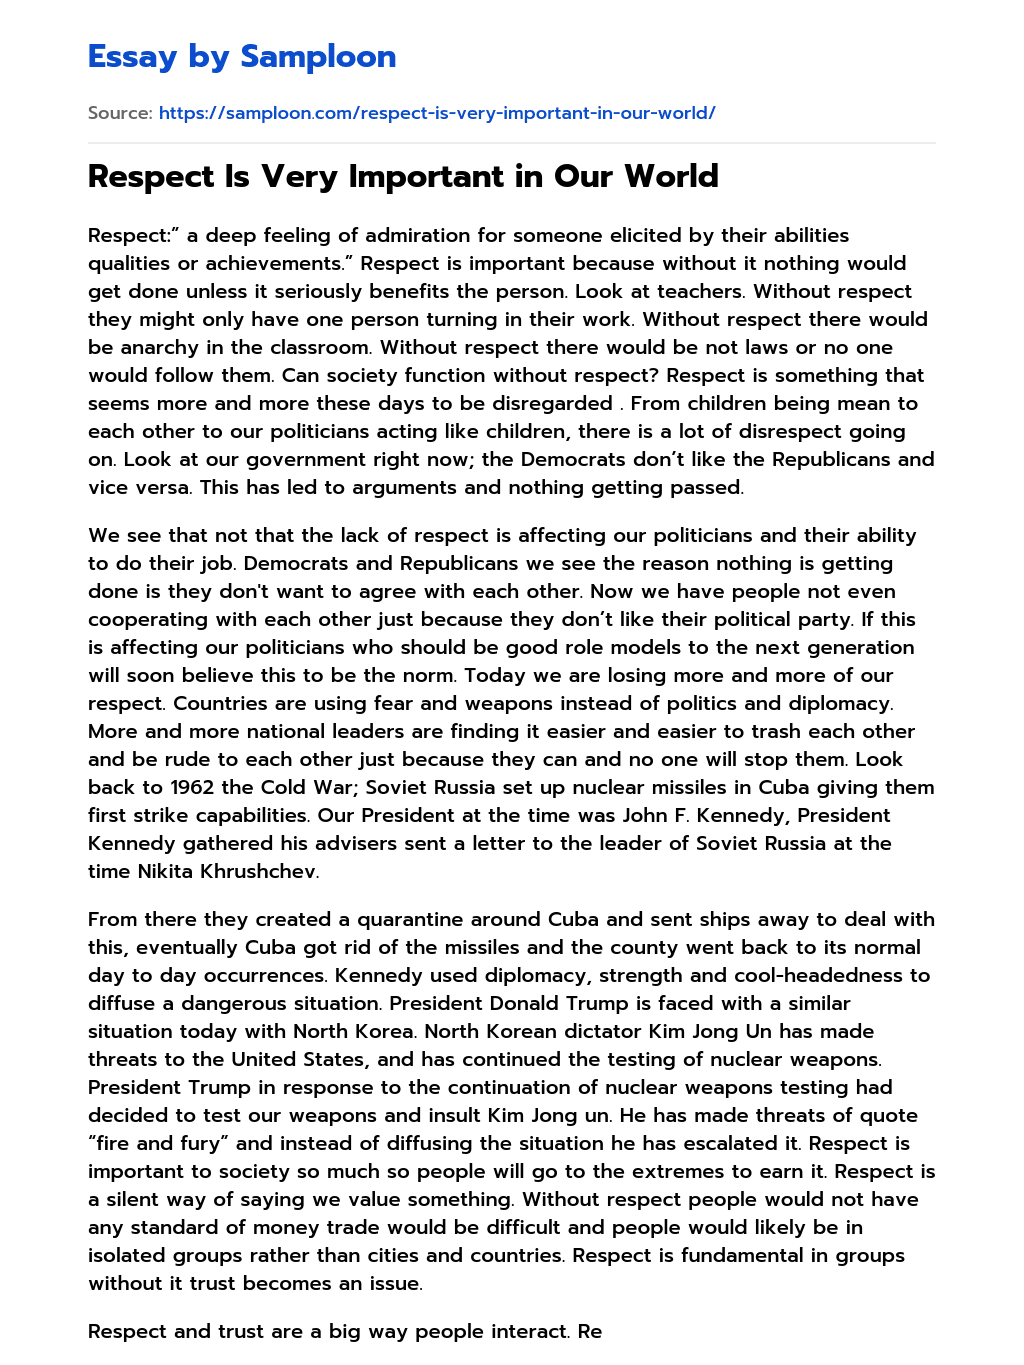 Respect Is Very Important in Our World essay